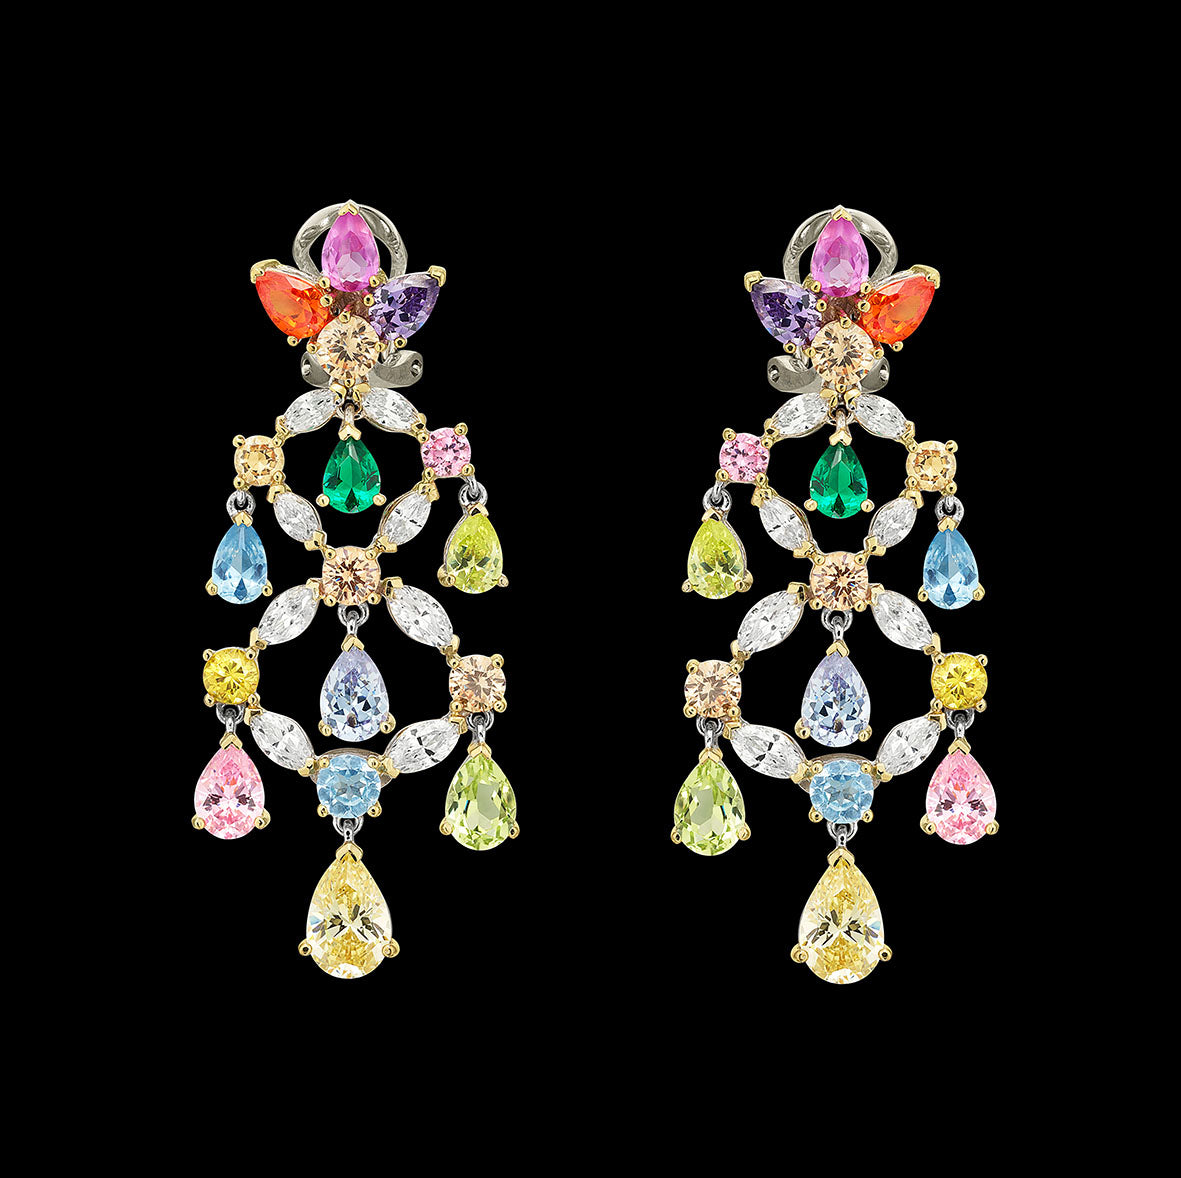 Rainbow Chandelier Earrings, Earring, Anabela Chan Joaillerie - Fine jewelry with laboratory grown and created gemstones hand-crafted in the United Kingdom. Anabela Chan Joaillerie is the first fine jewellery brand in the world to champion laboratory-grown and created gemstones with high jewellery design, artisanal craftsmanship and a focus on ethical and sustainable innovations.